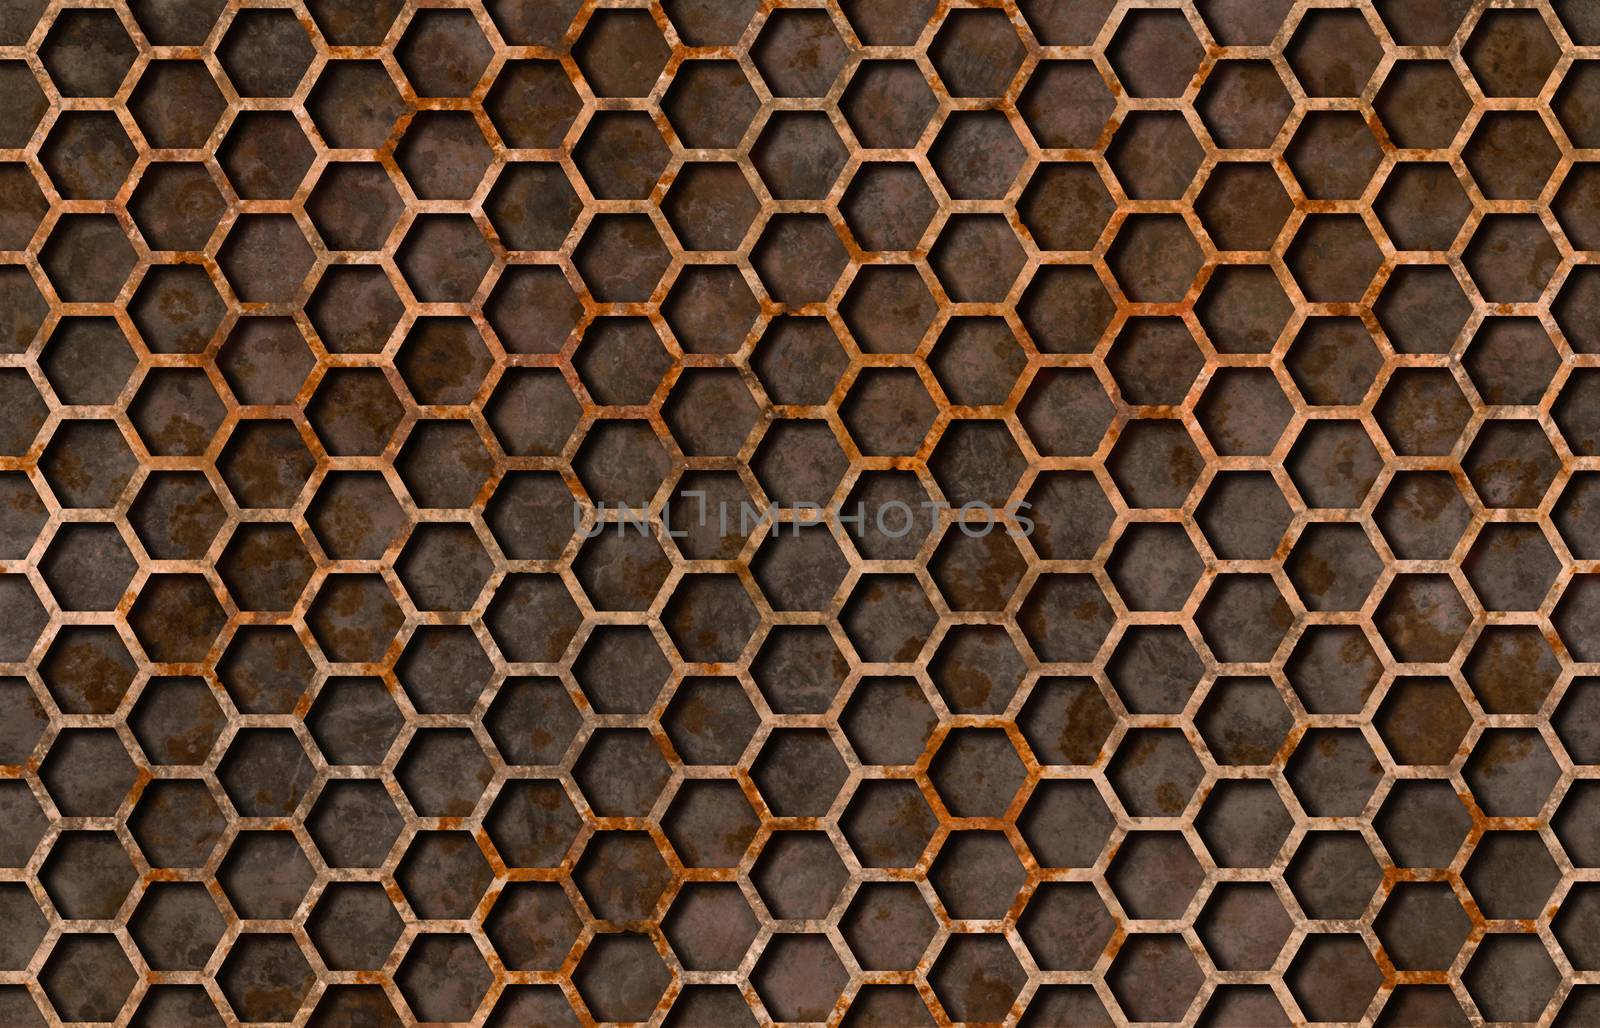 Rusty hexagon pattern grate texture seamlessly tileable by Balefire9